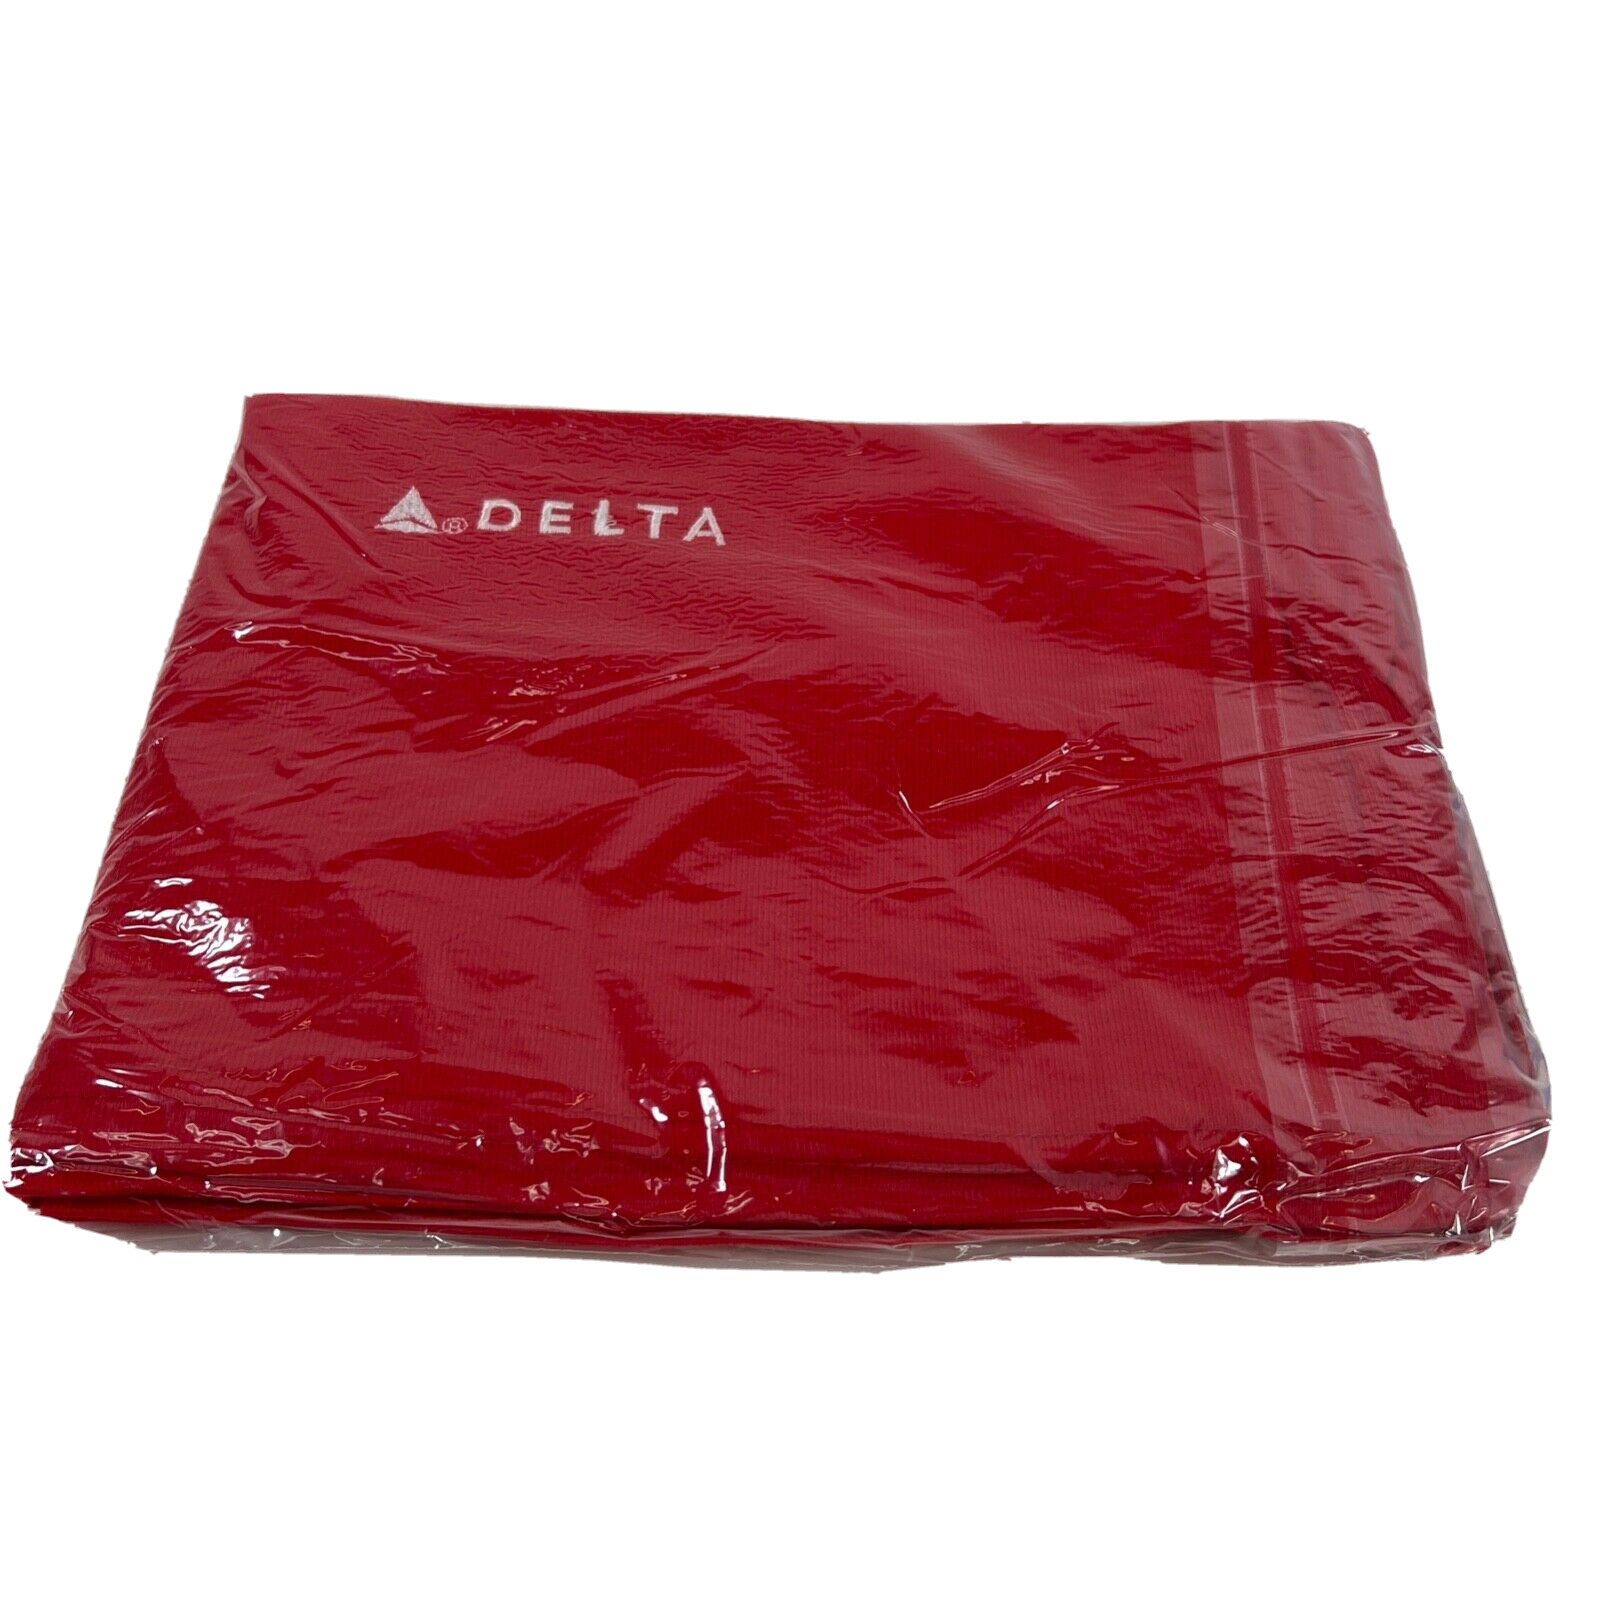 NEW Delta Airlines Embroidered Logo Lap Blanket Red Flight Trip Throw Airplane